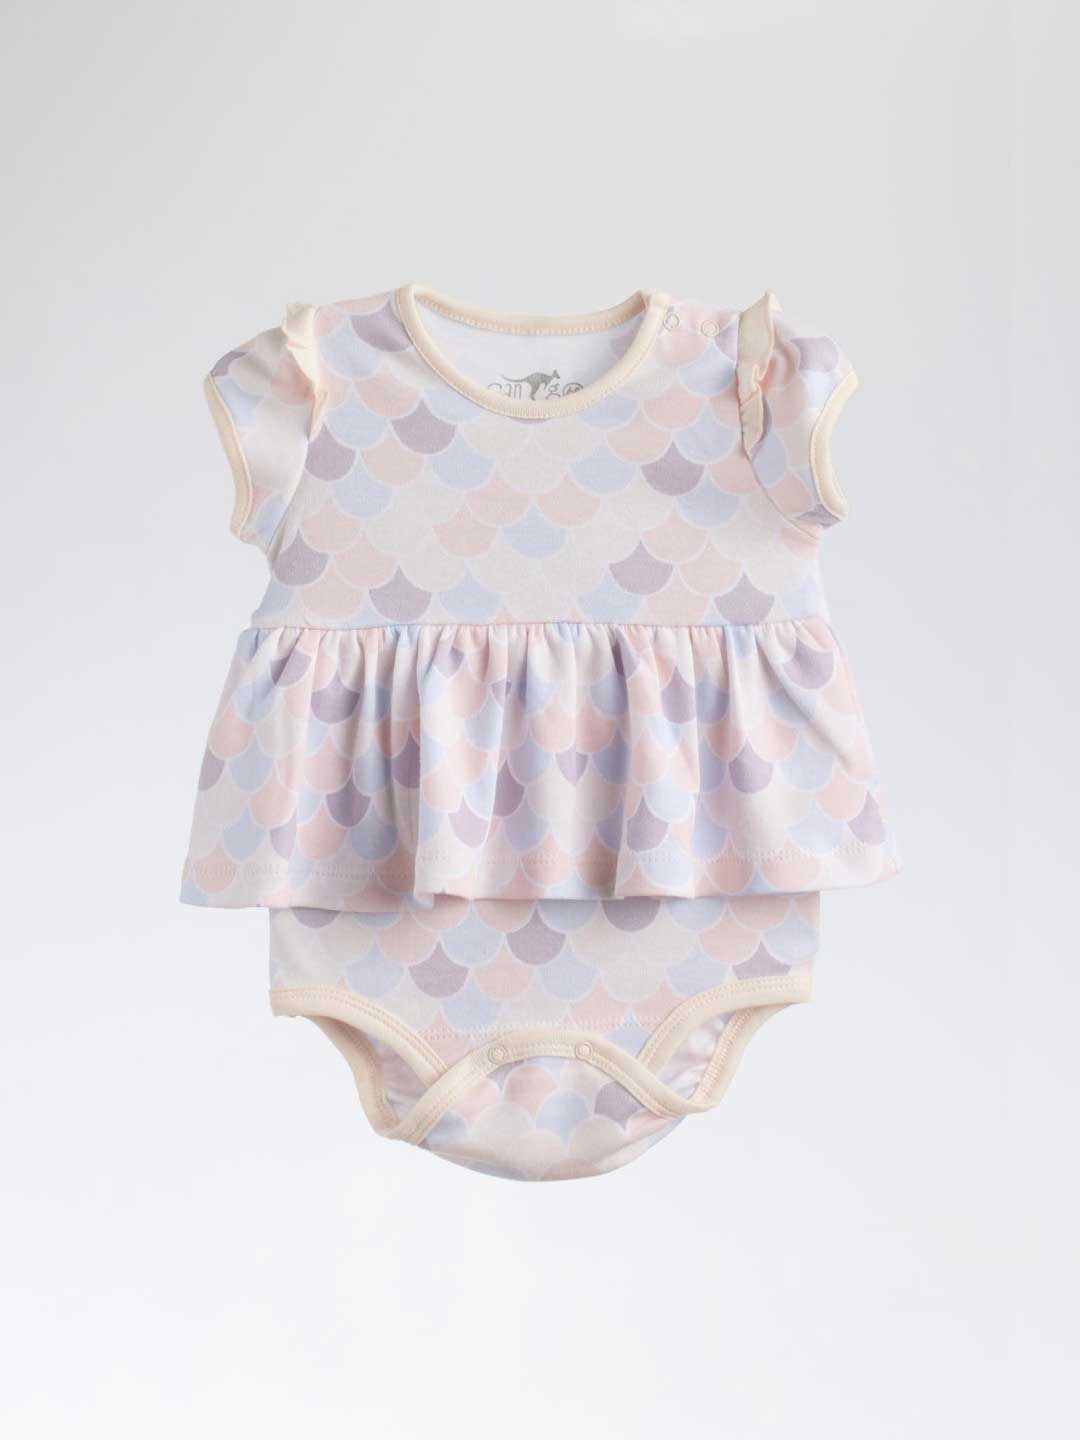 Our Infant Bodysuit Gold Fish 304 is made with the comfort and style of your little one in mind.